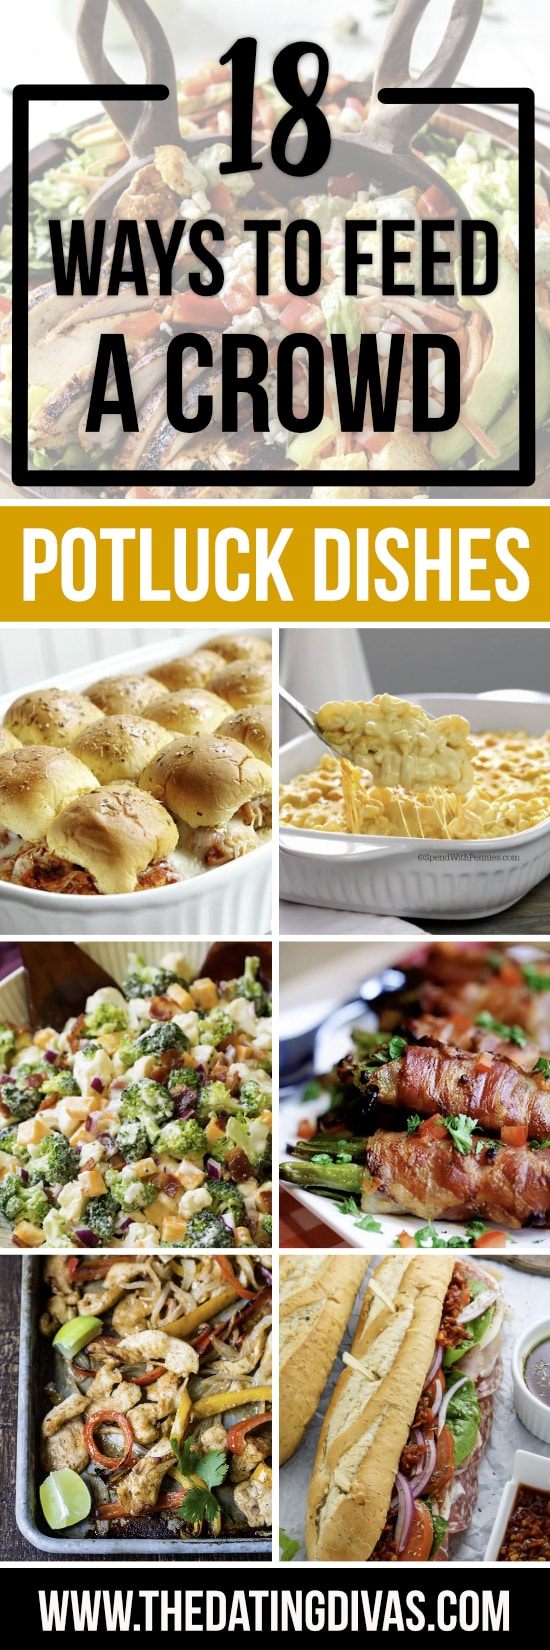 Potluck Dishes for a Crowd